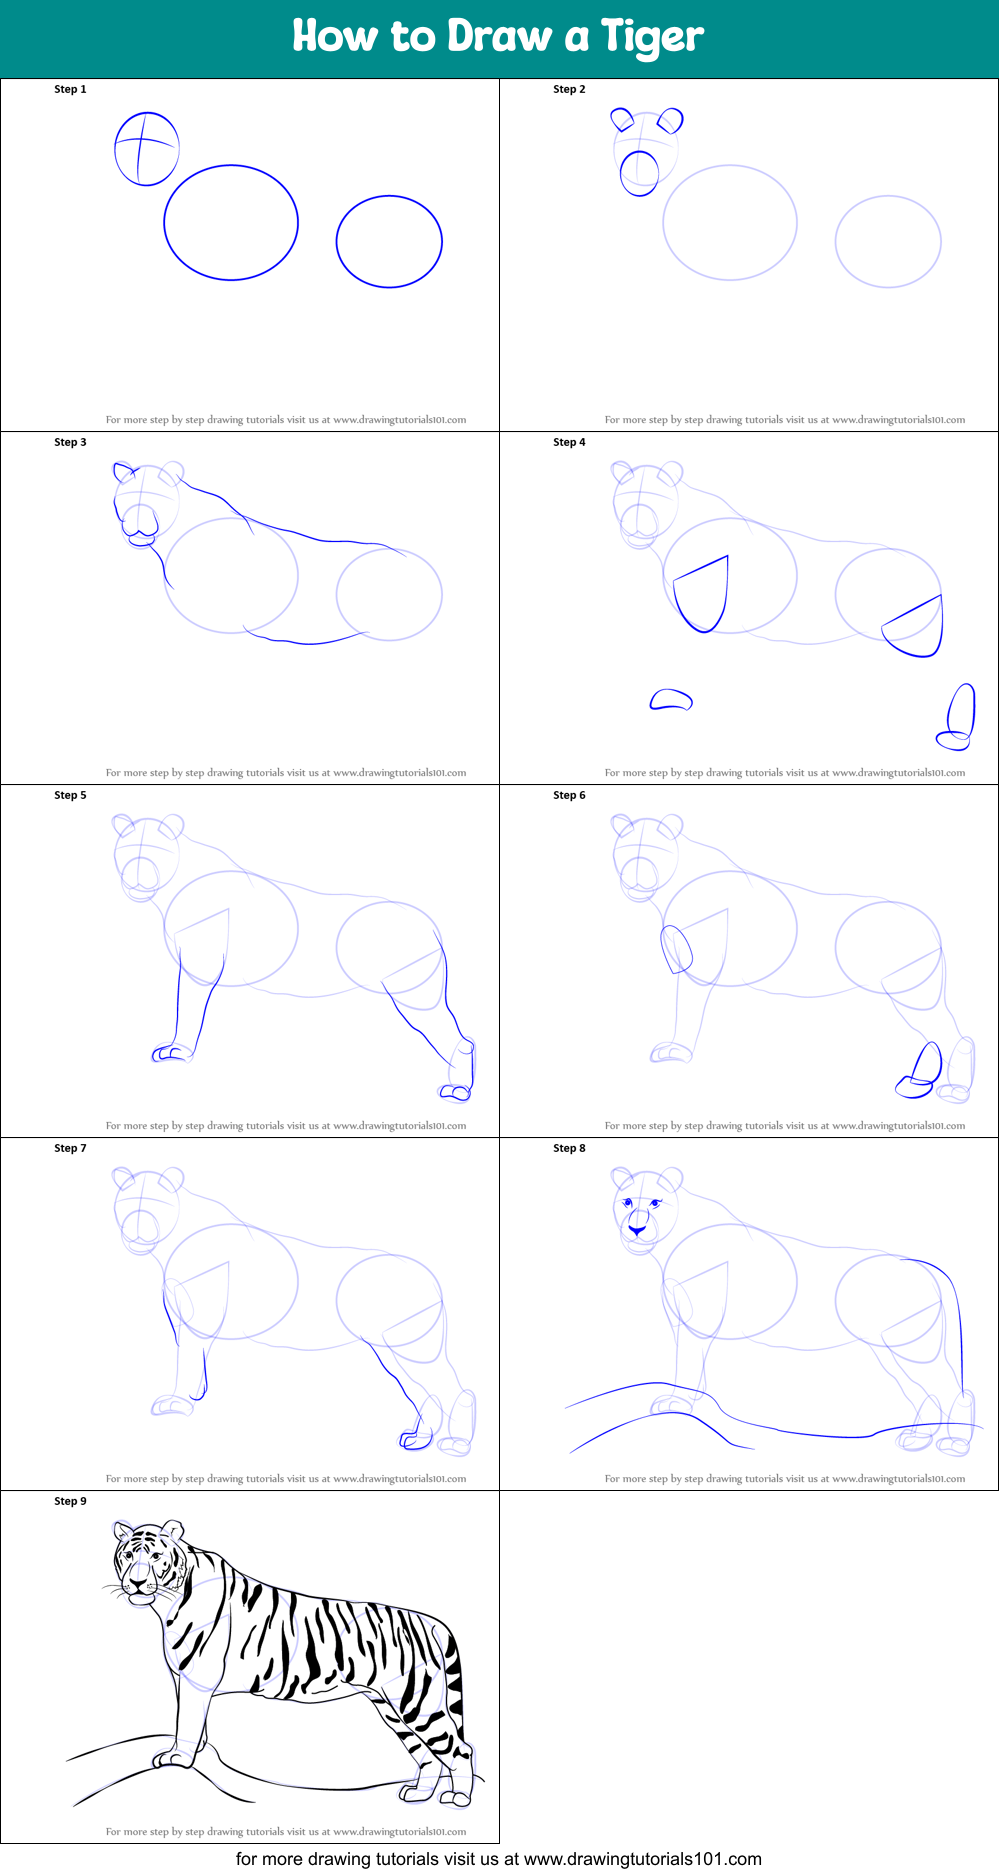 How to Draw a Tiger (Zoo Animals) Step by Step | DrawingTutorials101.com